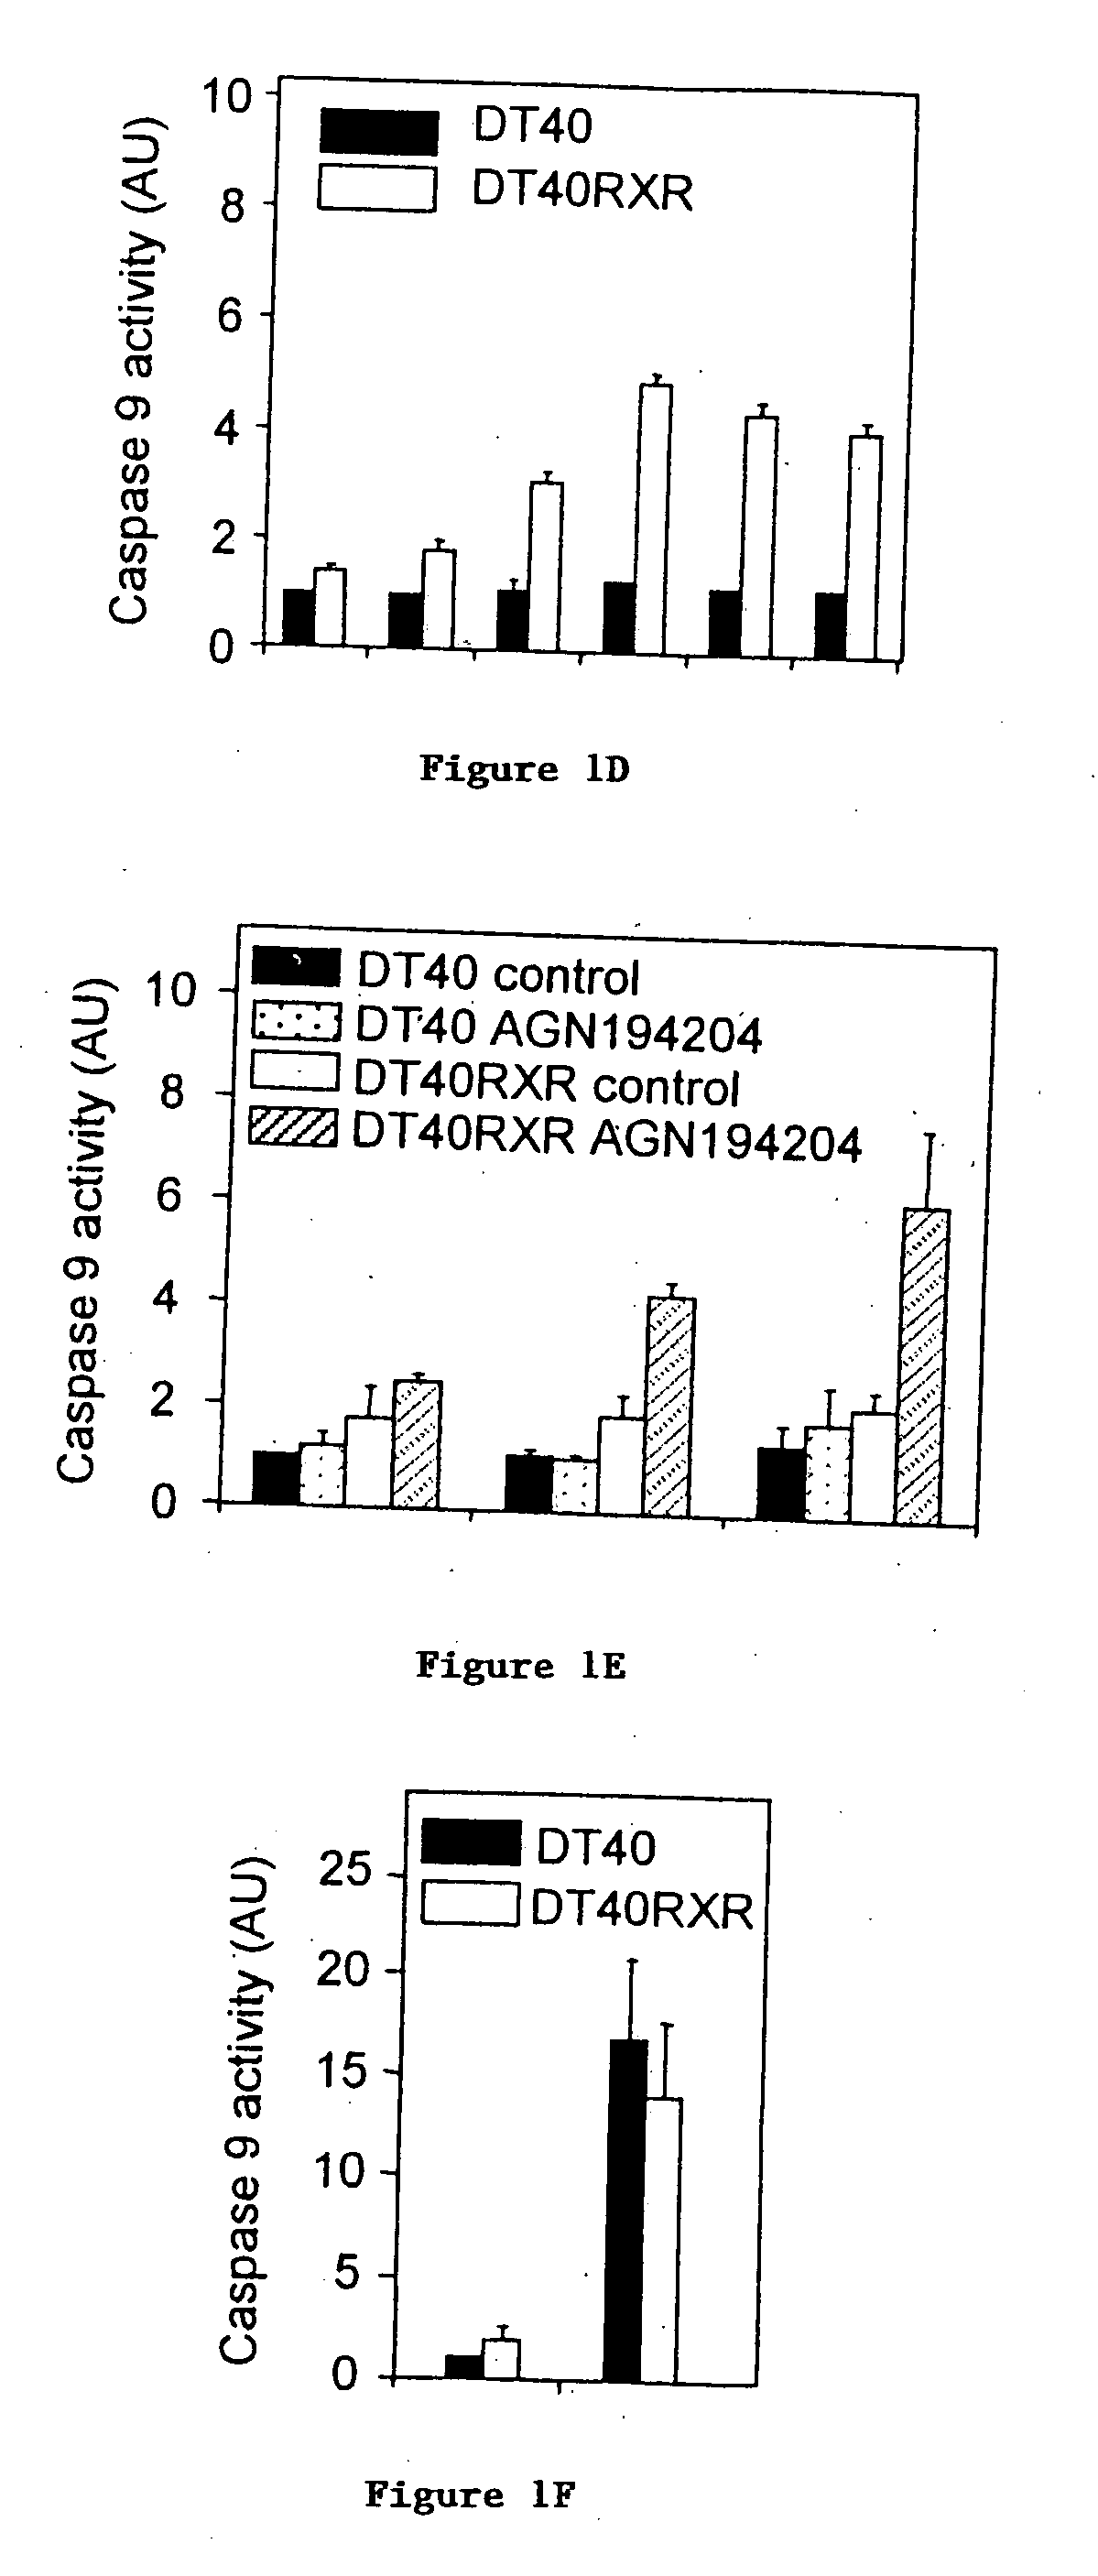 Methods for inhibiting cell growth